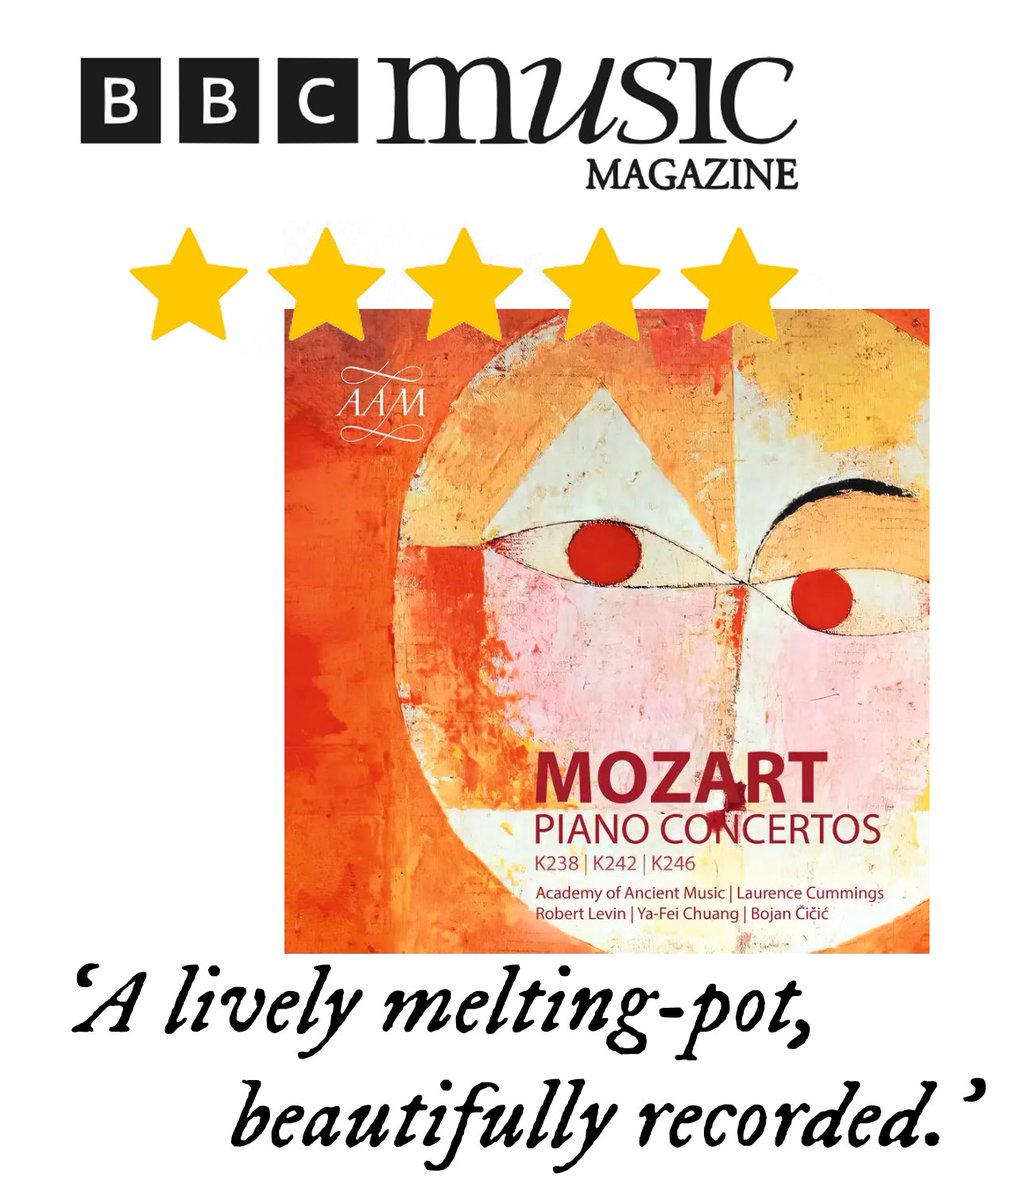 ‘If the sound is one delight, others include the deft playing, sprightly tempos, and dynamics that convey drama without ever being exaggerated.’

⭐️ ⭐️ ⭐️ ⭐️ ⭐️ from @MusicMagazine & May’s Concerto Choice!

classical-music.com/reviews/mozart…